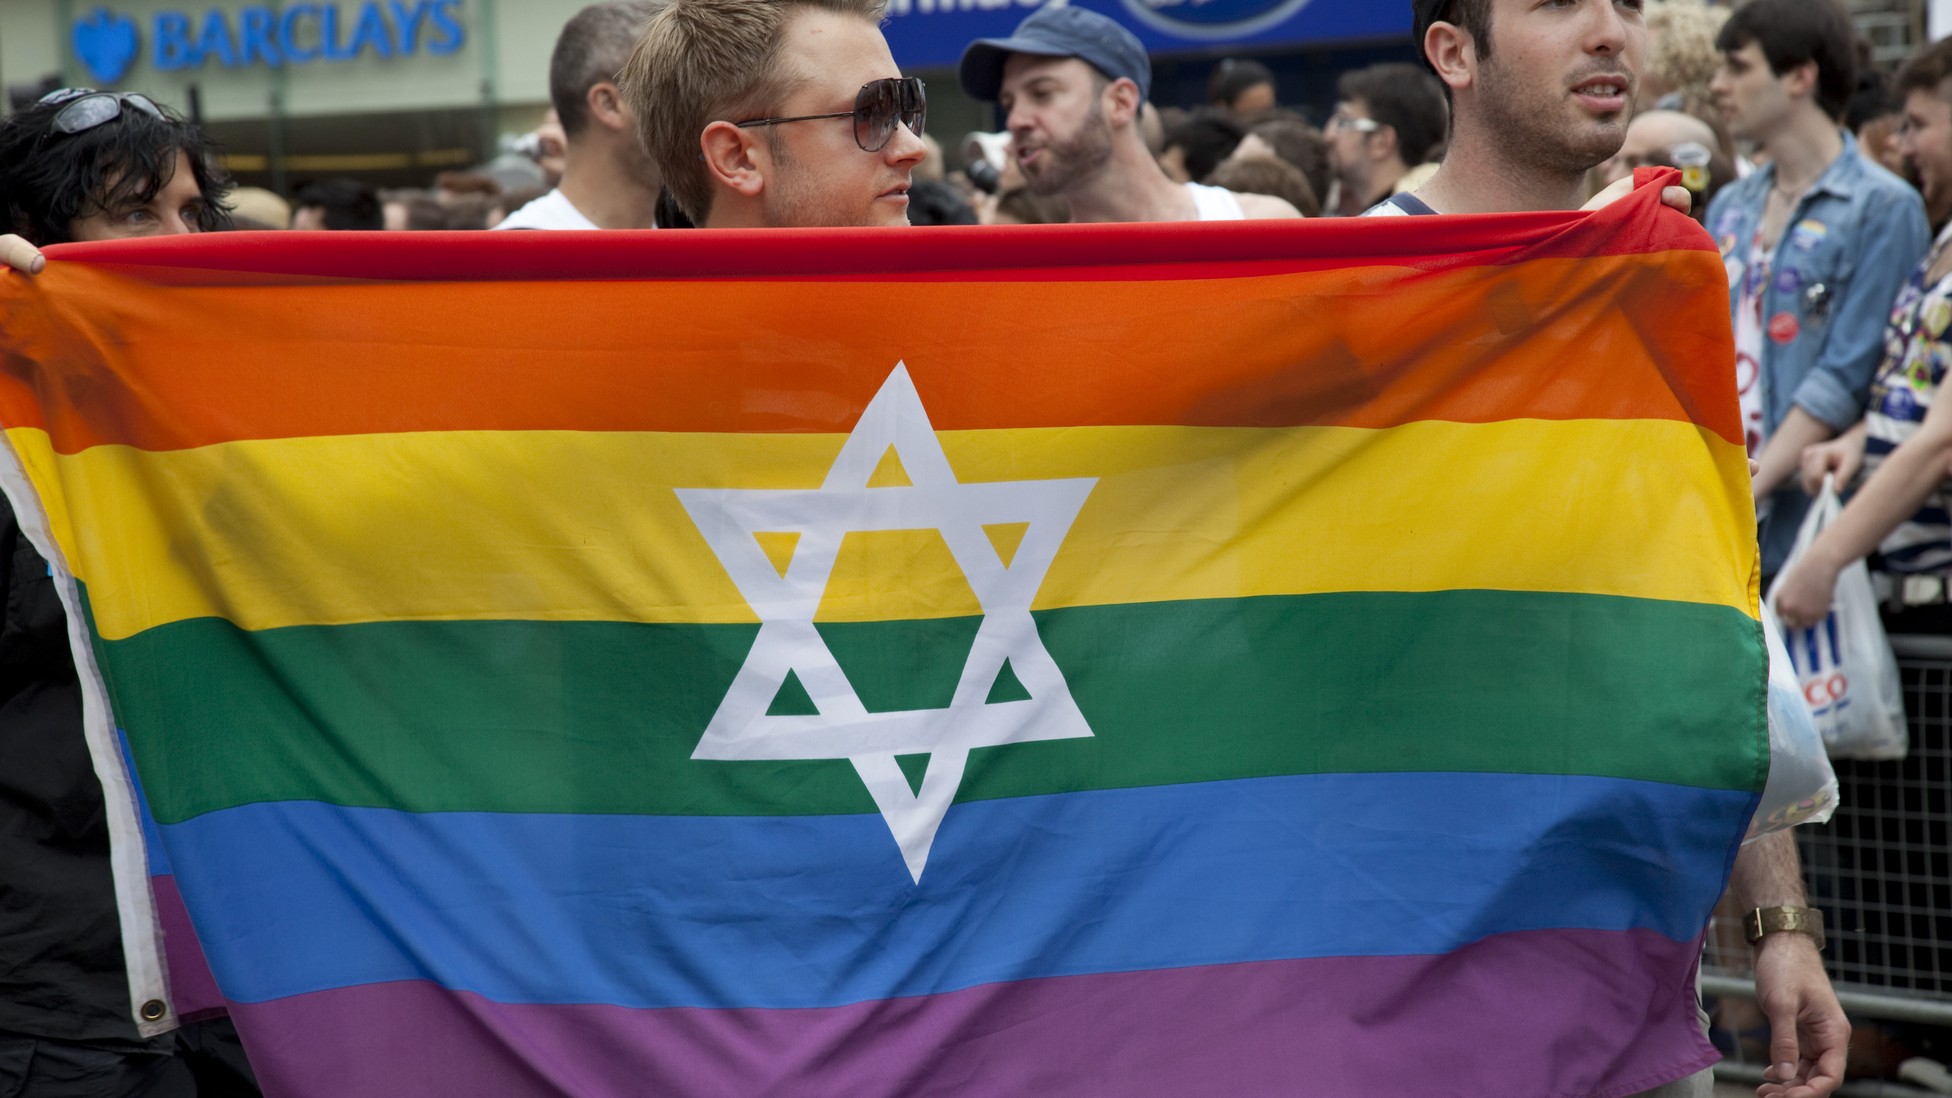 Reform Jews Extend An Unprecedented Welcome To Transgender People The Atlantic